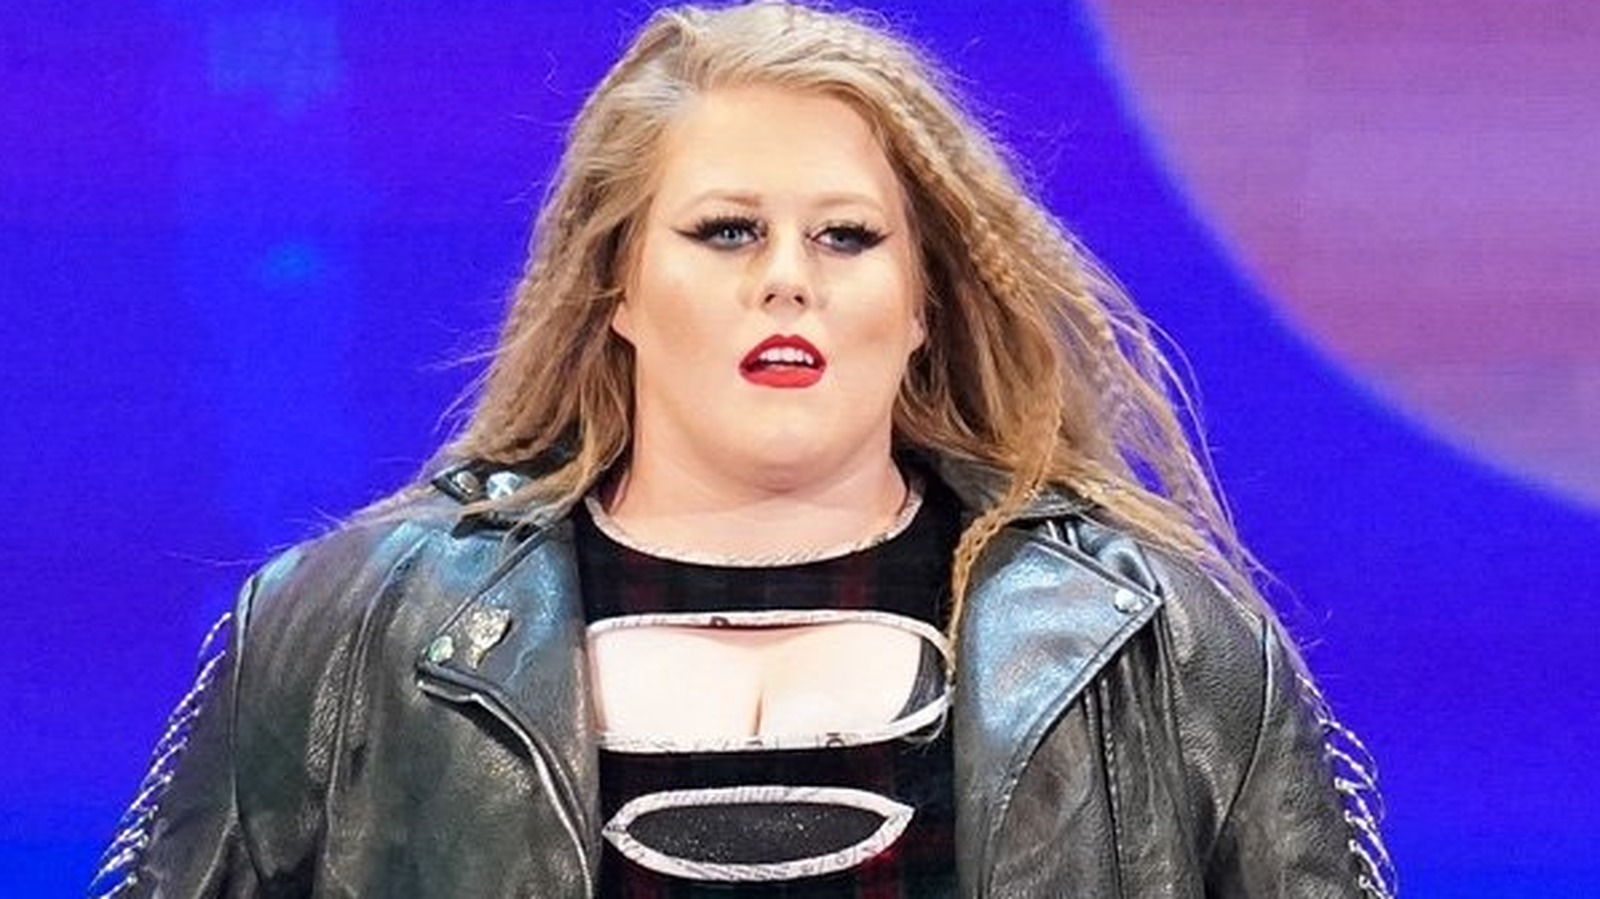 Doudrop Addresses The Possibility Triple H Will Change Her Name Back To Piper Niven pic